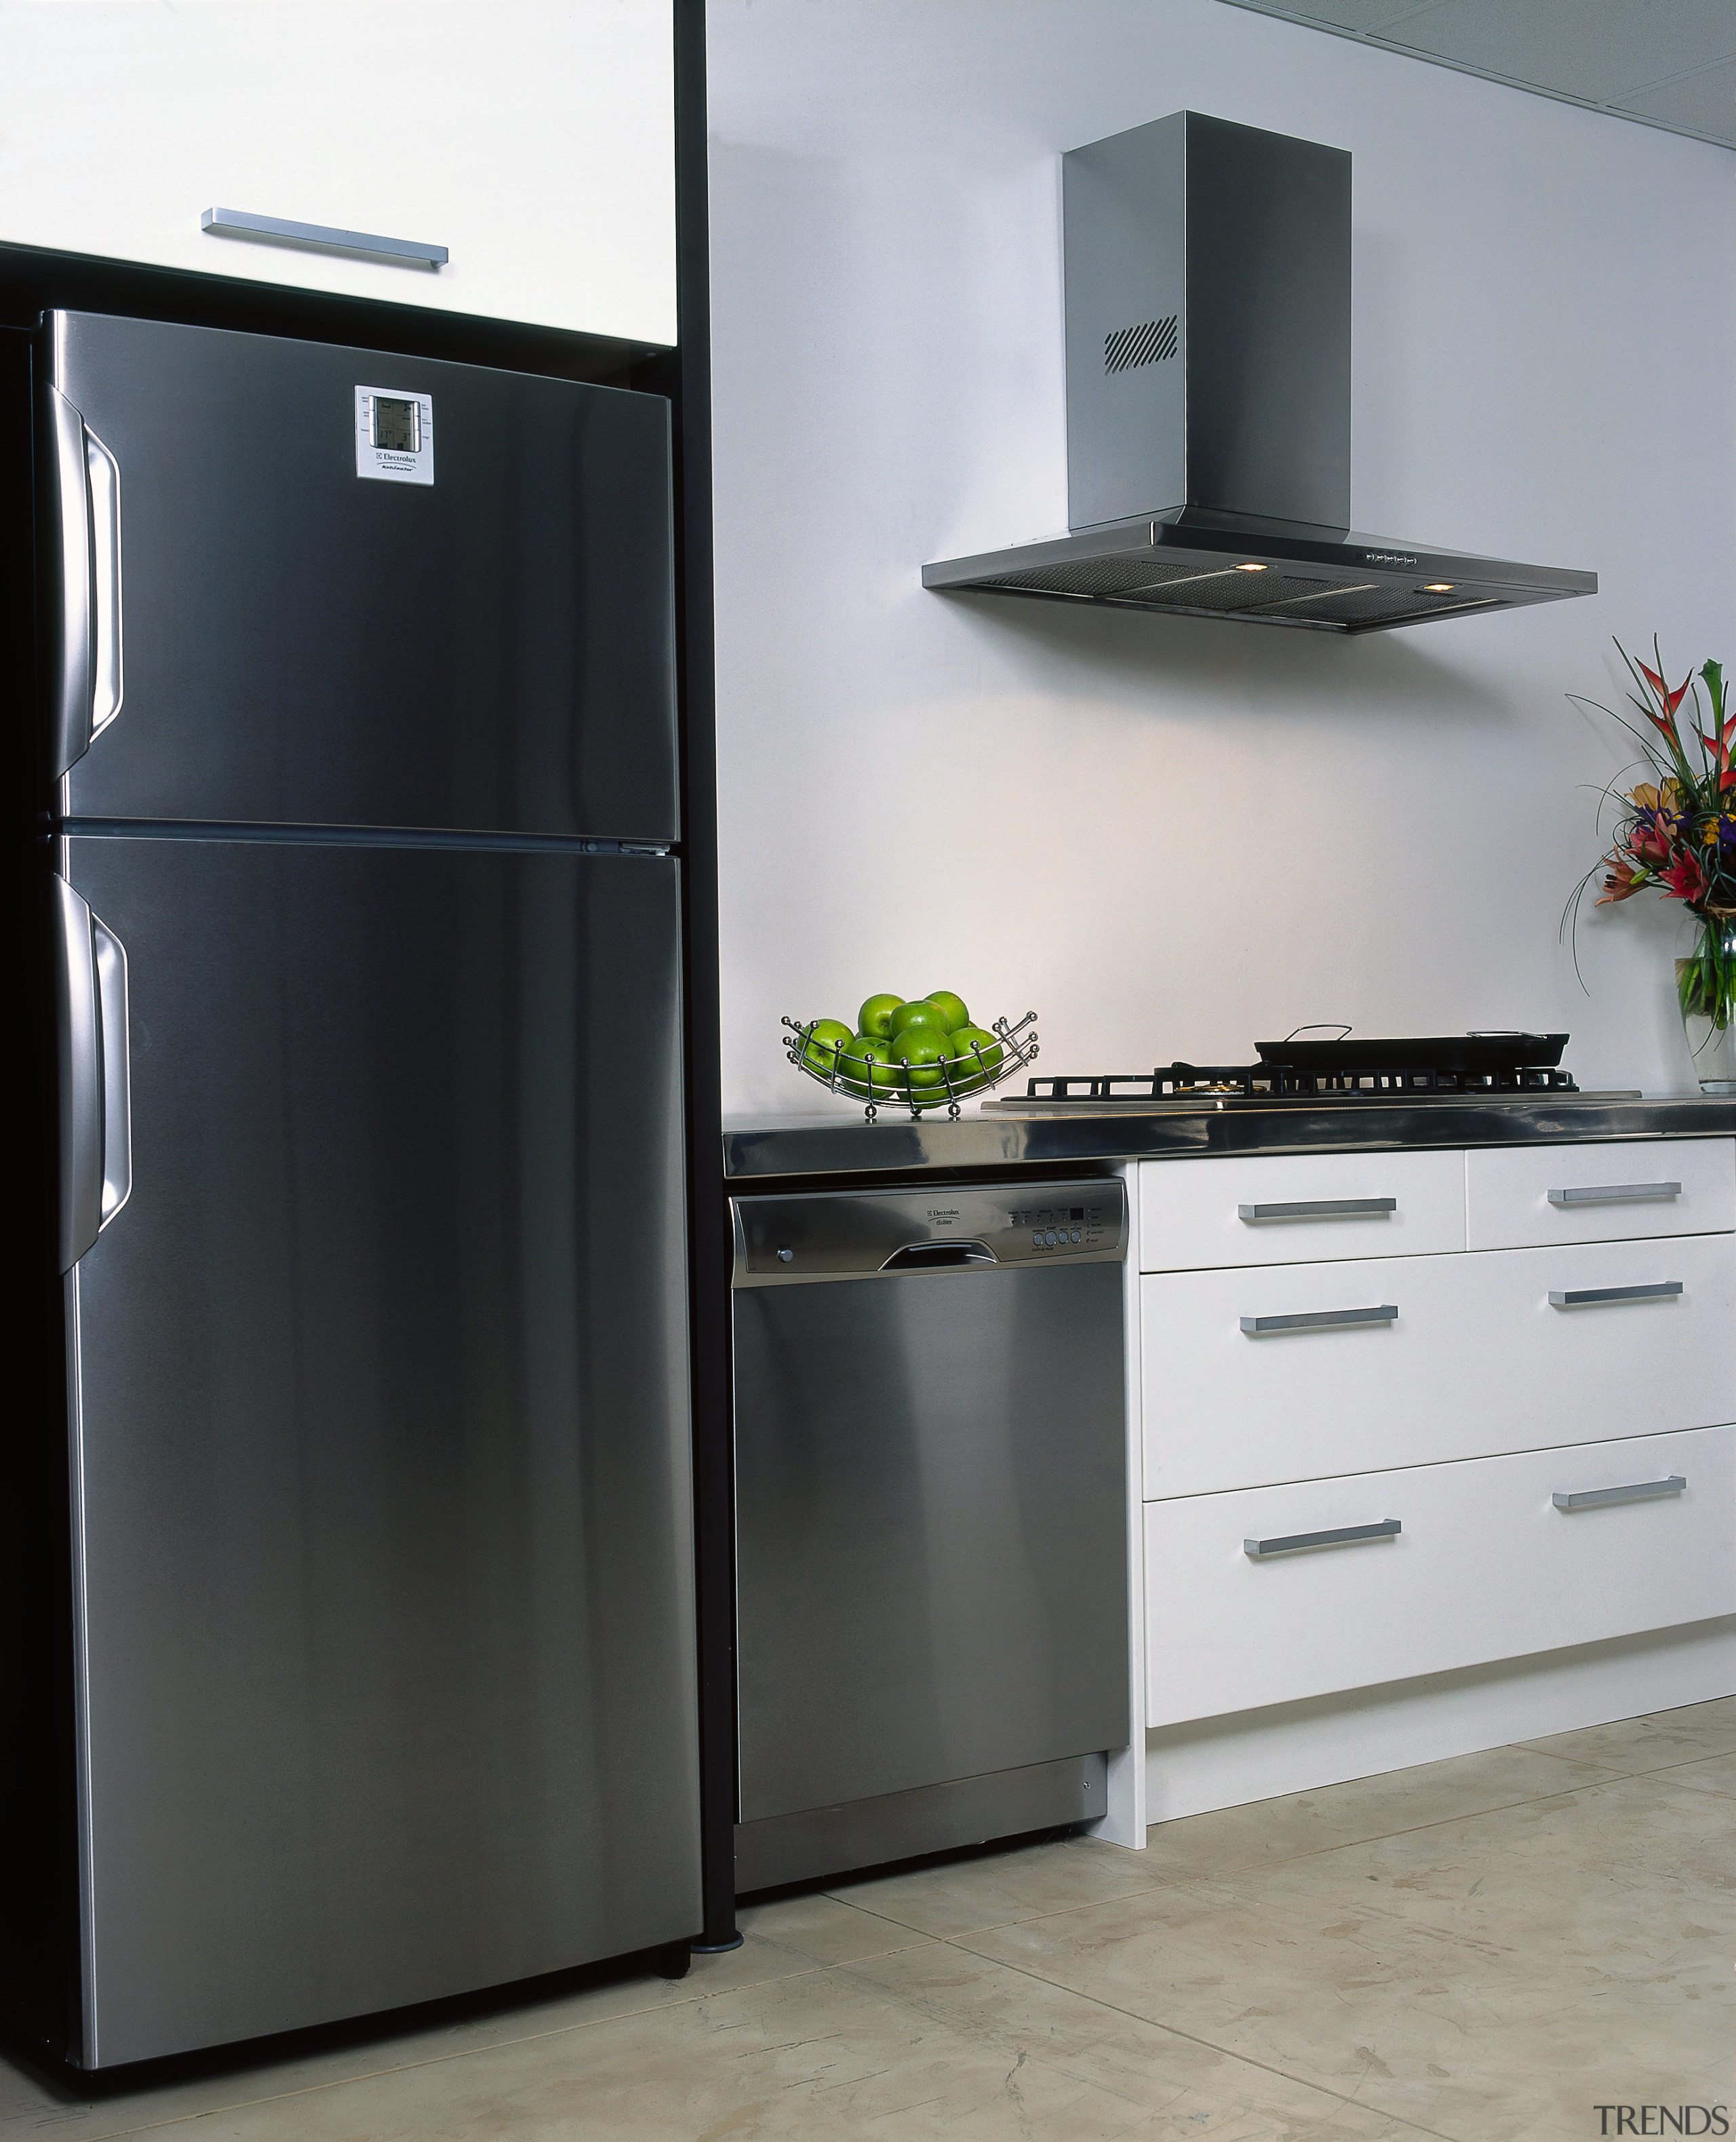 View of the kitchen appliances, including refrigerator, dishwasher, countertop, home appliance, kitchen, kitchen appliance, major appliance, product, product design, refrigerator, gray, black